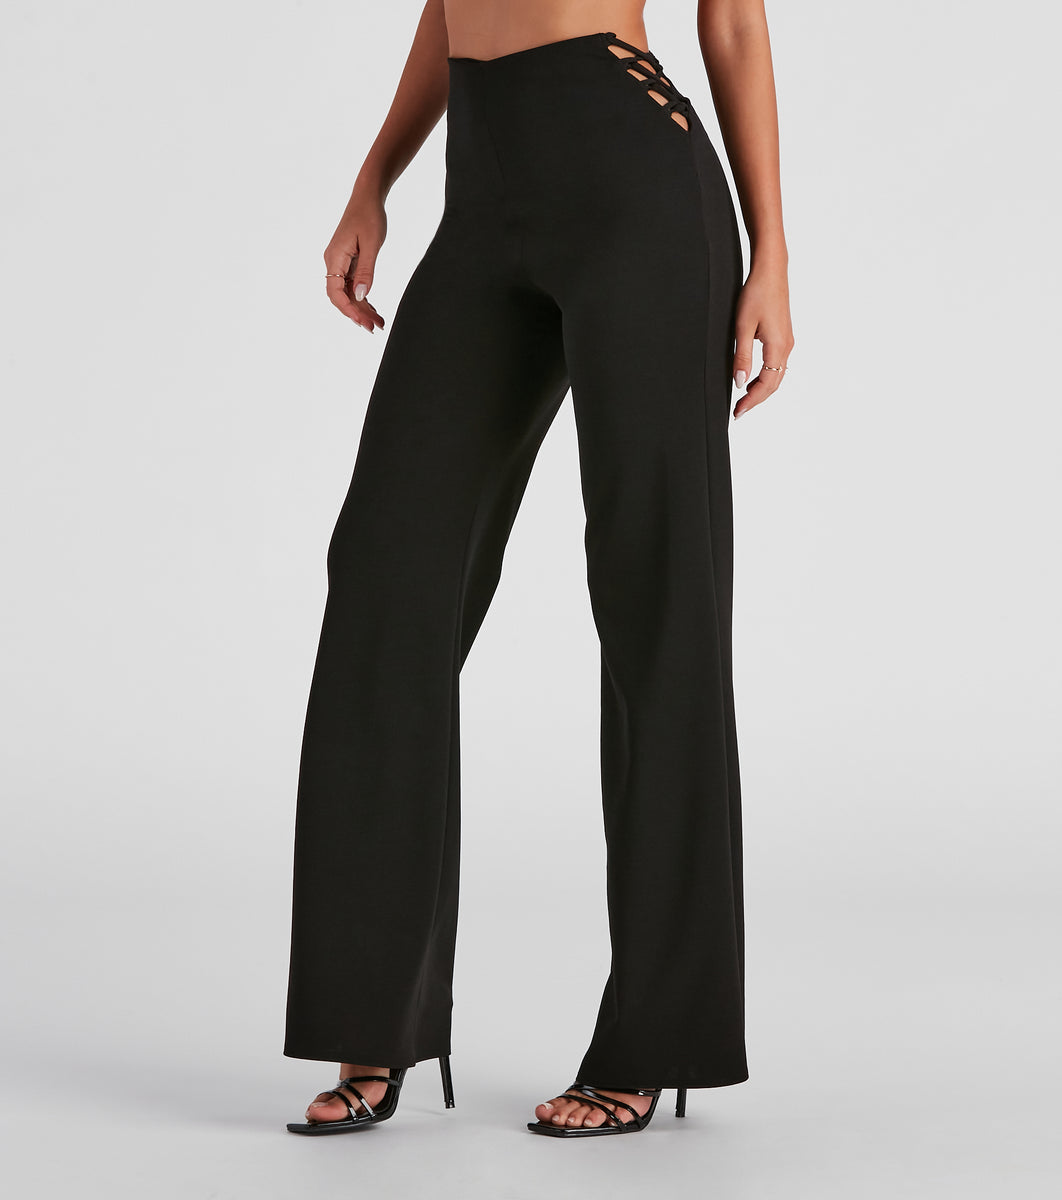 Eyes Up Here Crepe Lace-Up Pants